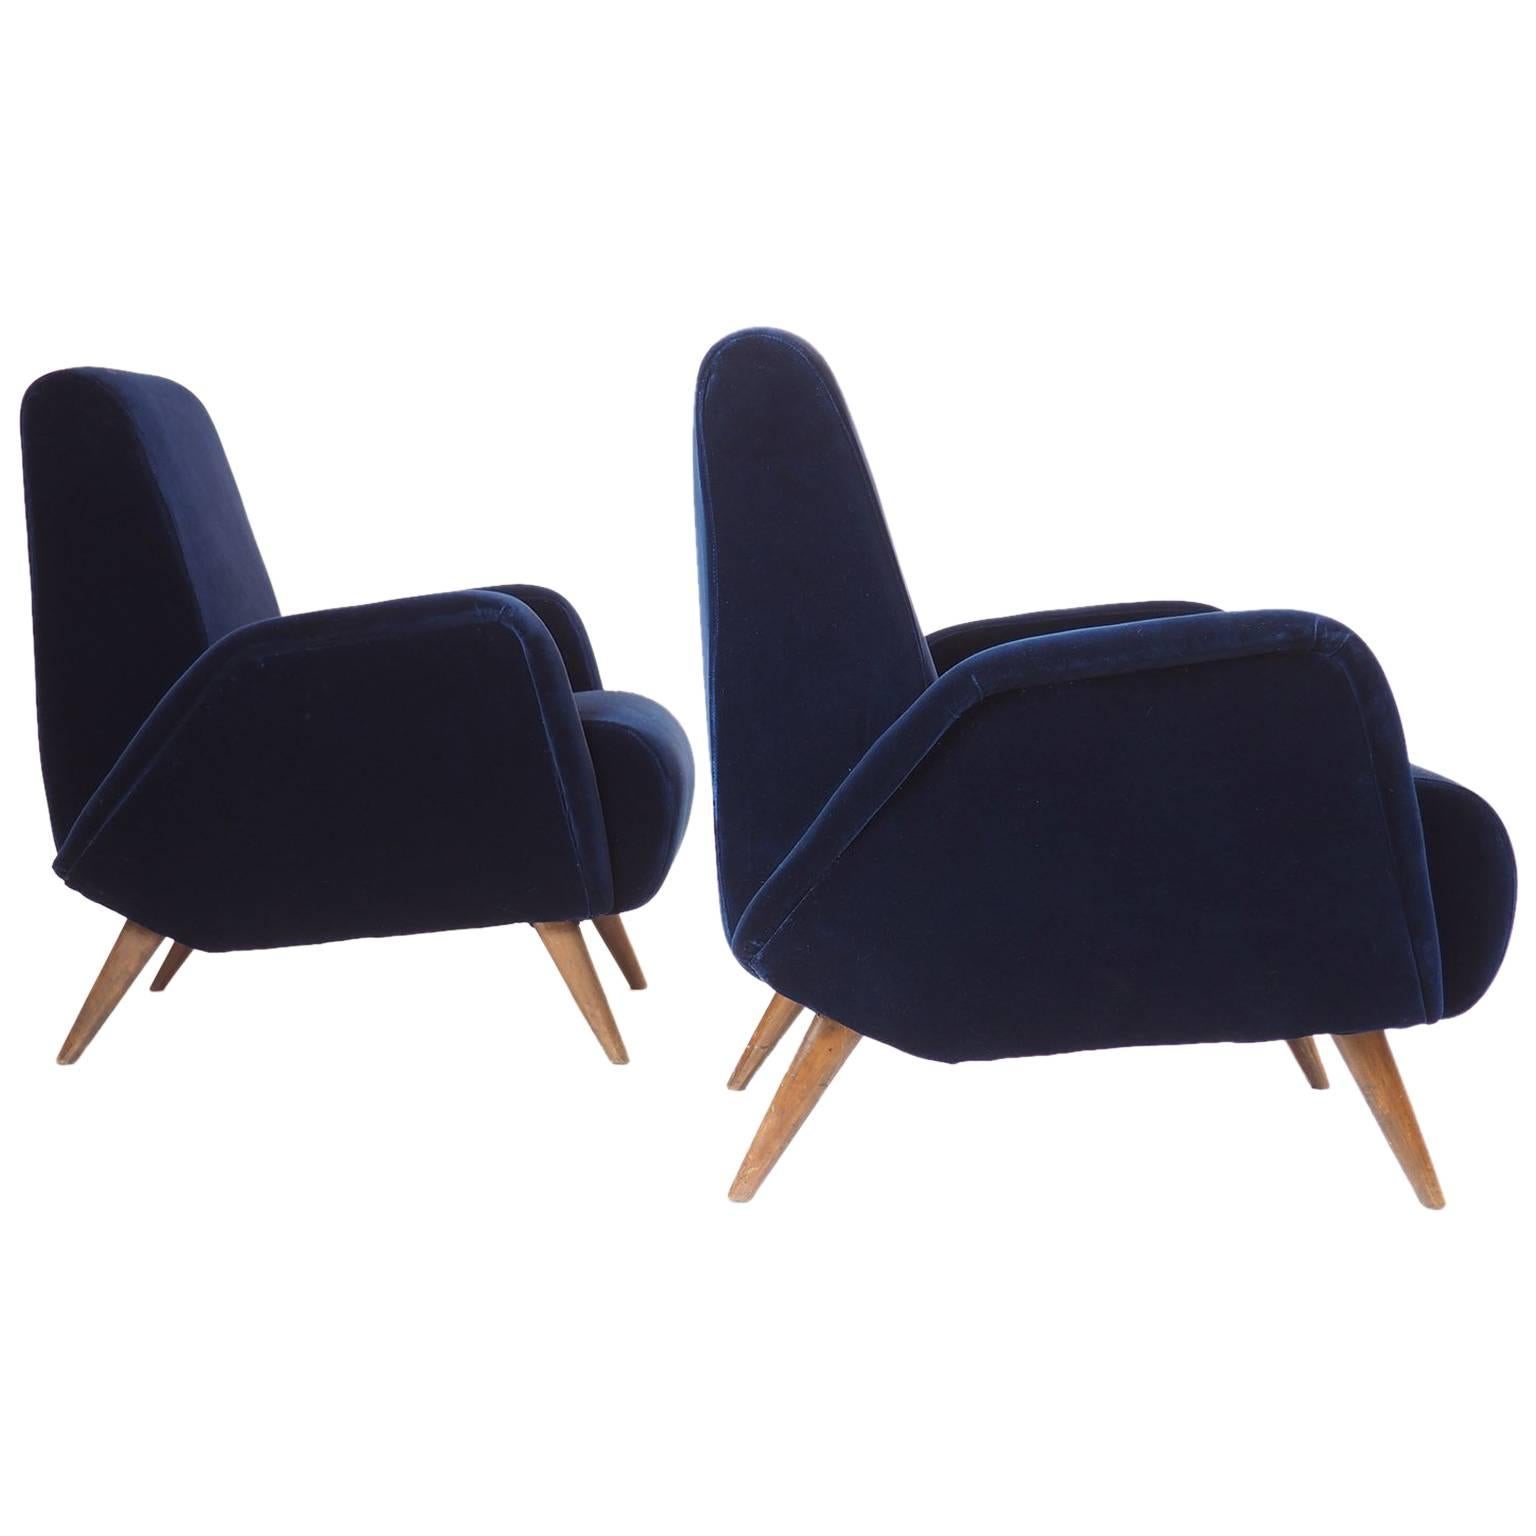 Pair of Blue Velvet Armchairs Manufactured by DASSI, Milano 1950s